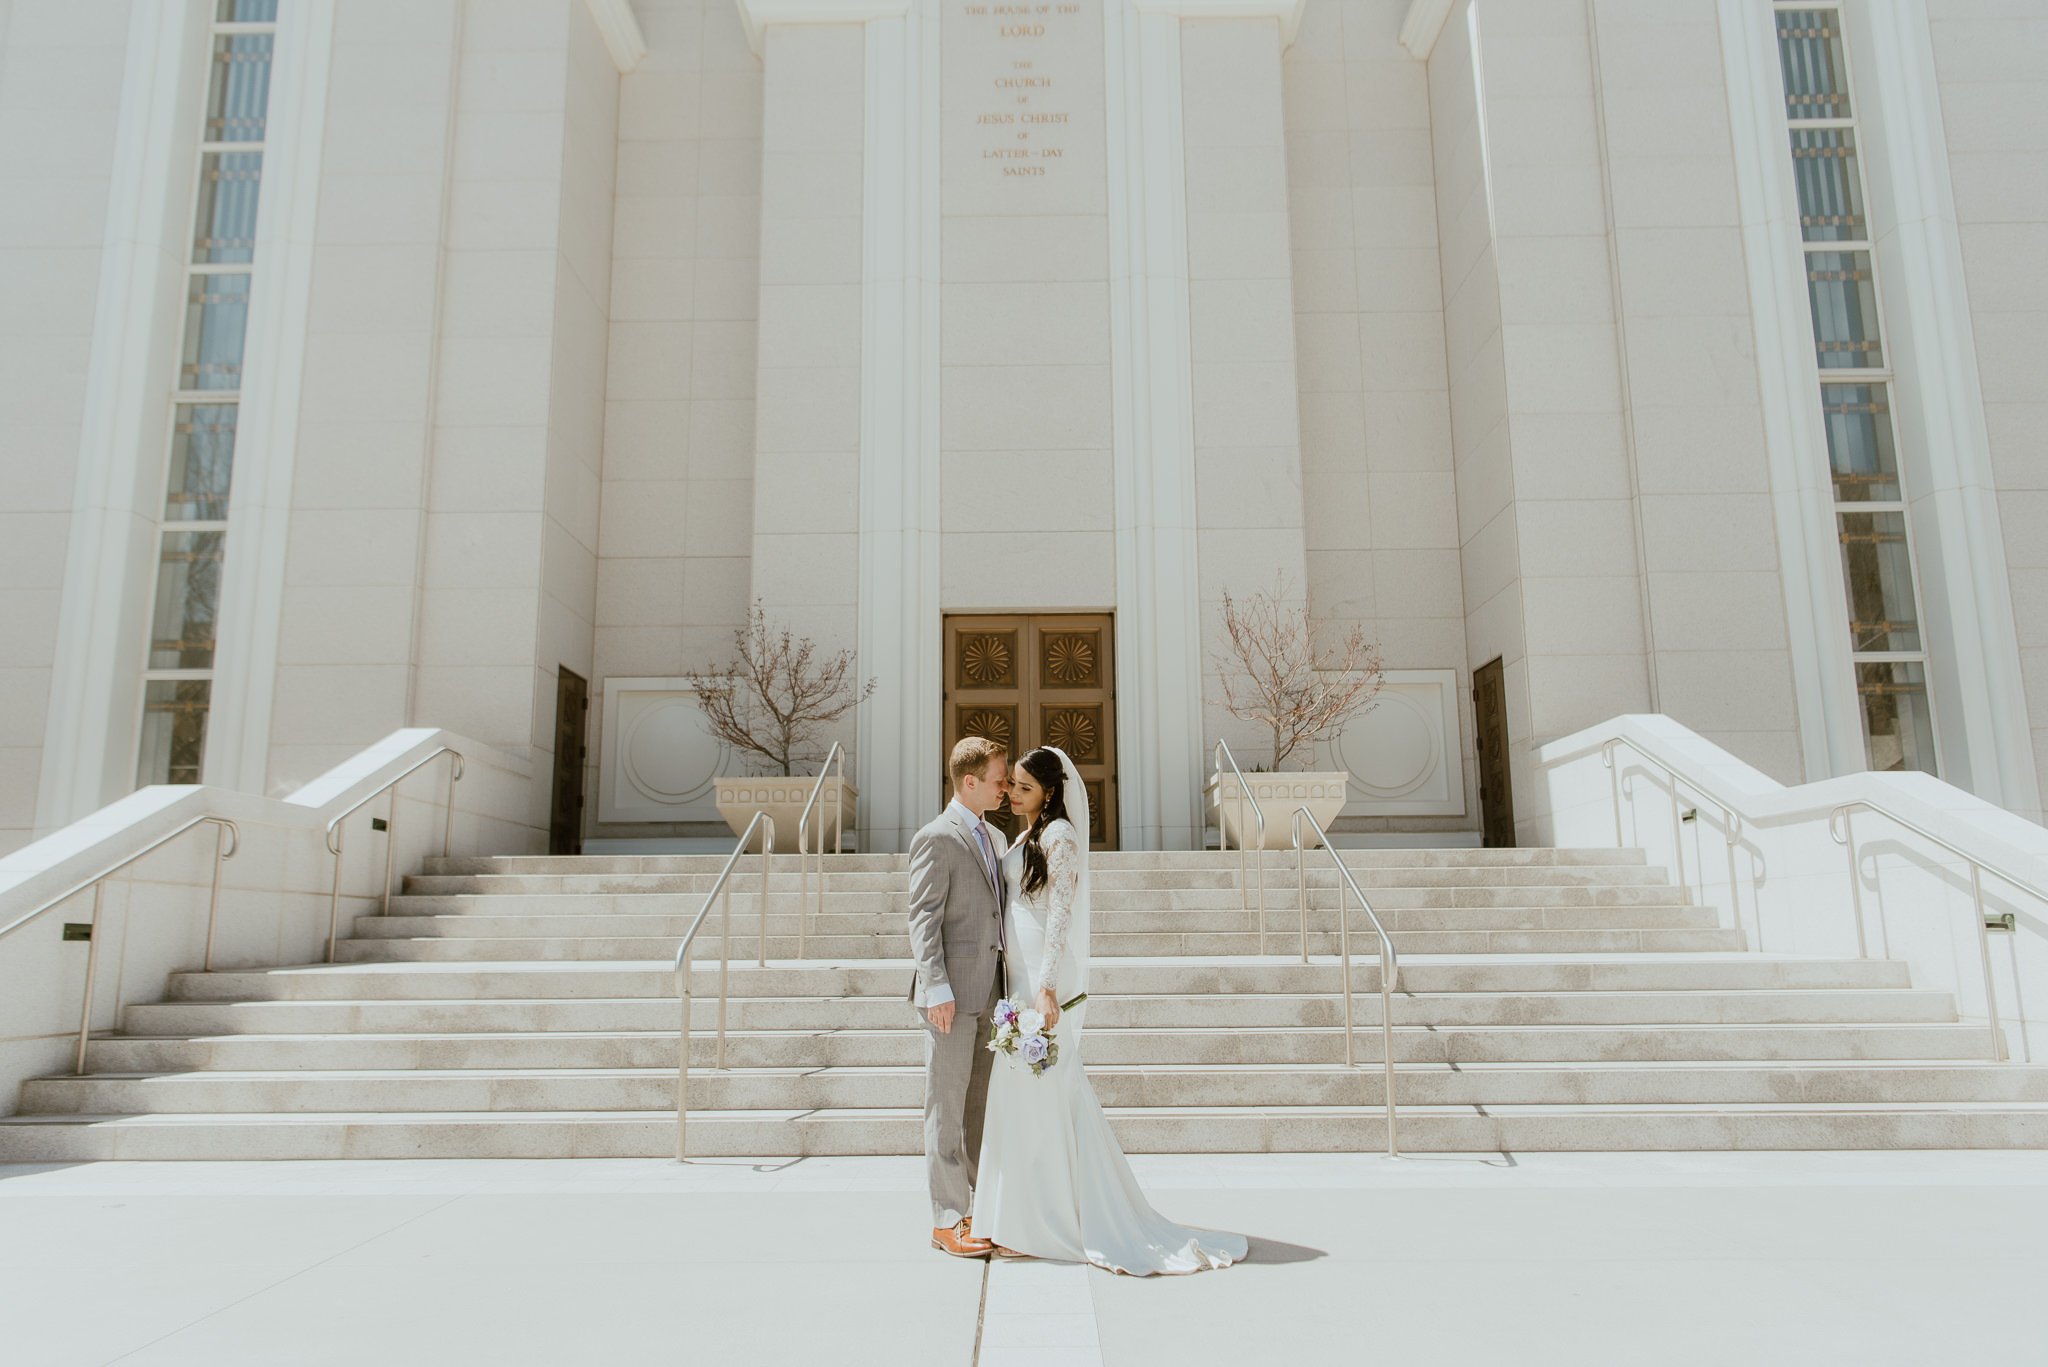 Utah-State-Capitol-Spring-Blossons-Bountiful-LDS-Wedding-Hopesandcheers-photo-48